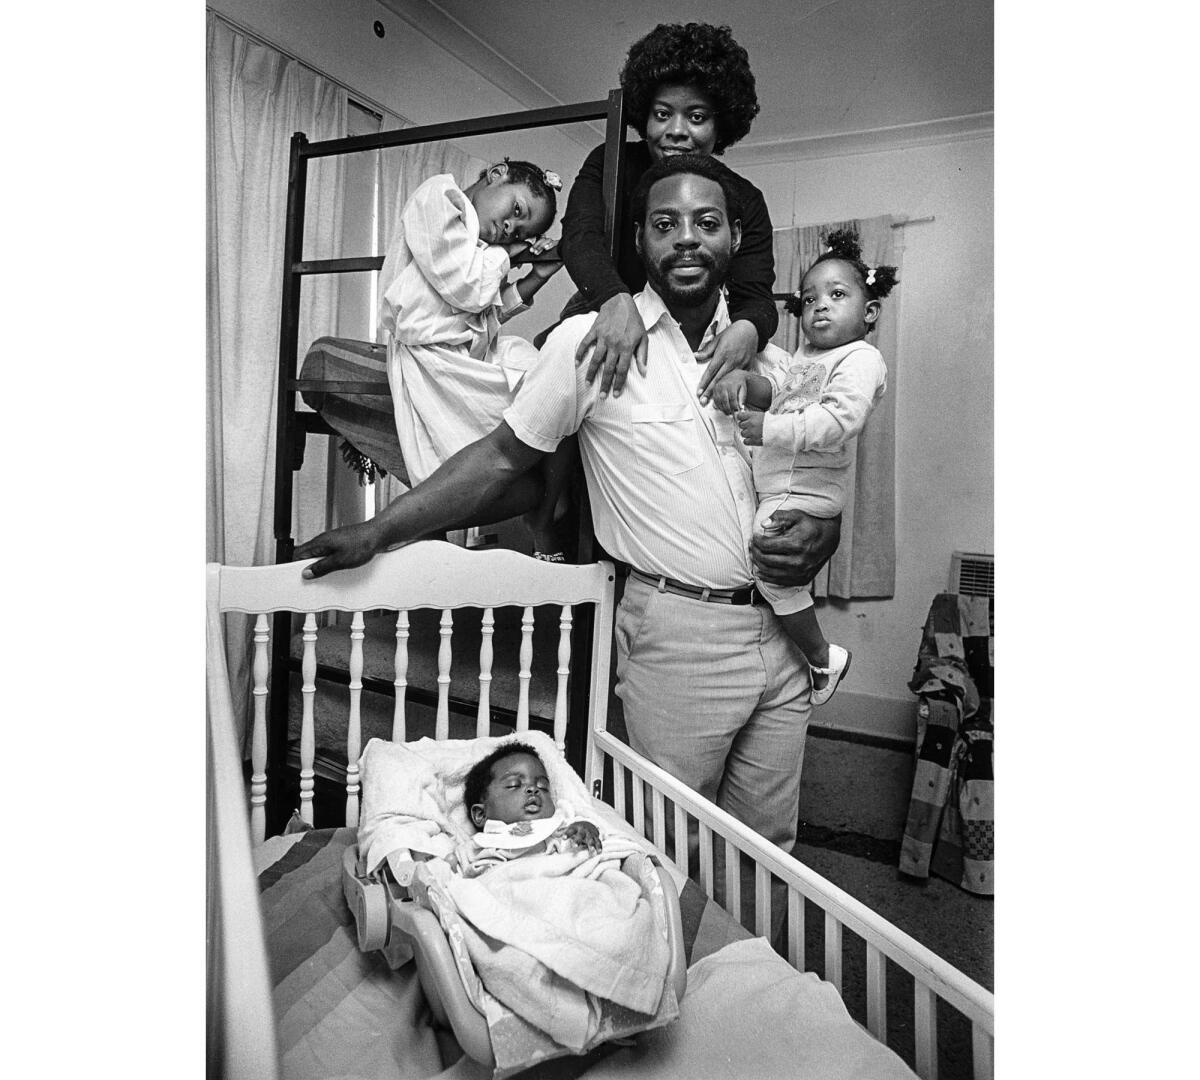 Jan. 12, 1987: Derrick McClendon, 31, wife Janice, 28, and children Lakretia, 7, Sonora, 15 months, and Carmello, 4 months, live in a shelter through the Inner Faith Center in San Pedro.